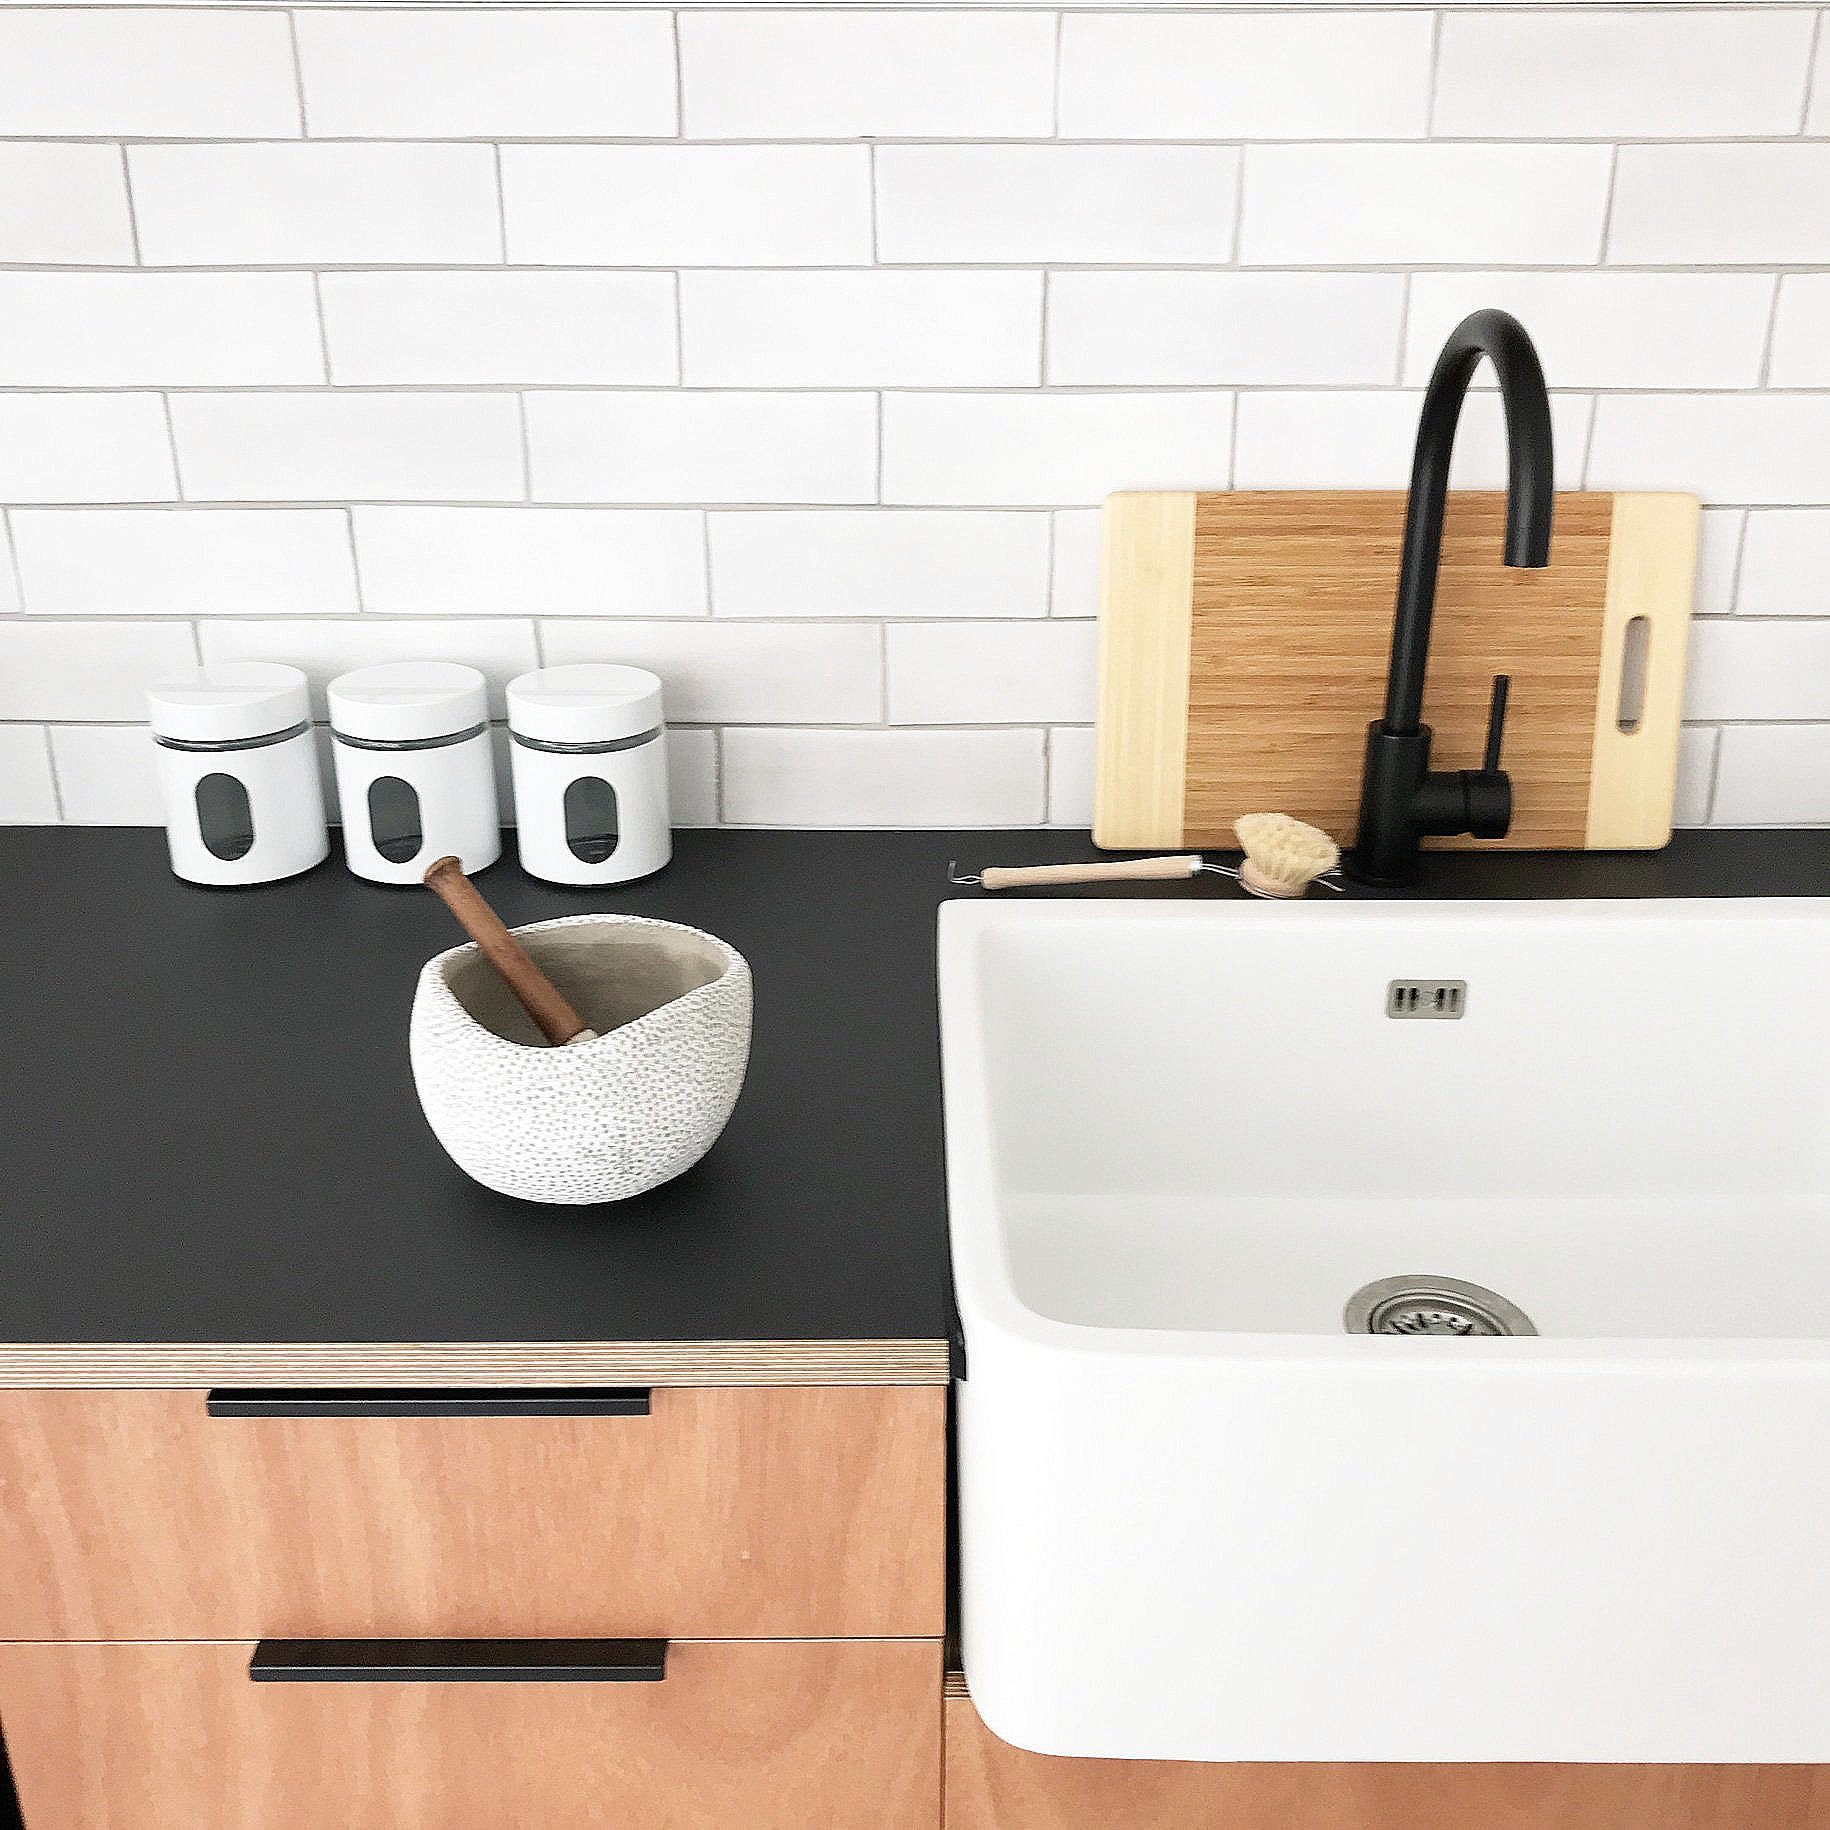 tiny-house-kitchenette-plywood-butlers-sink-motide.jpg